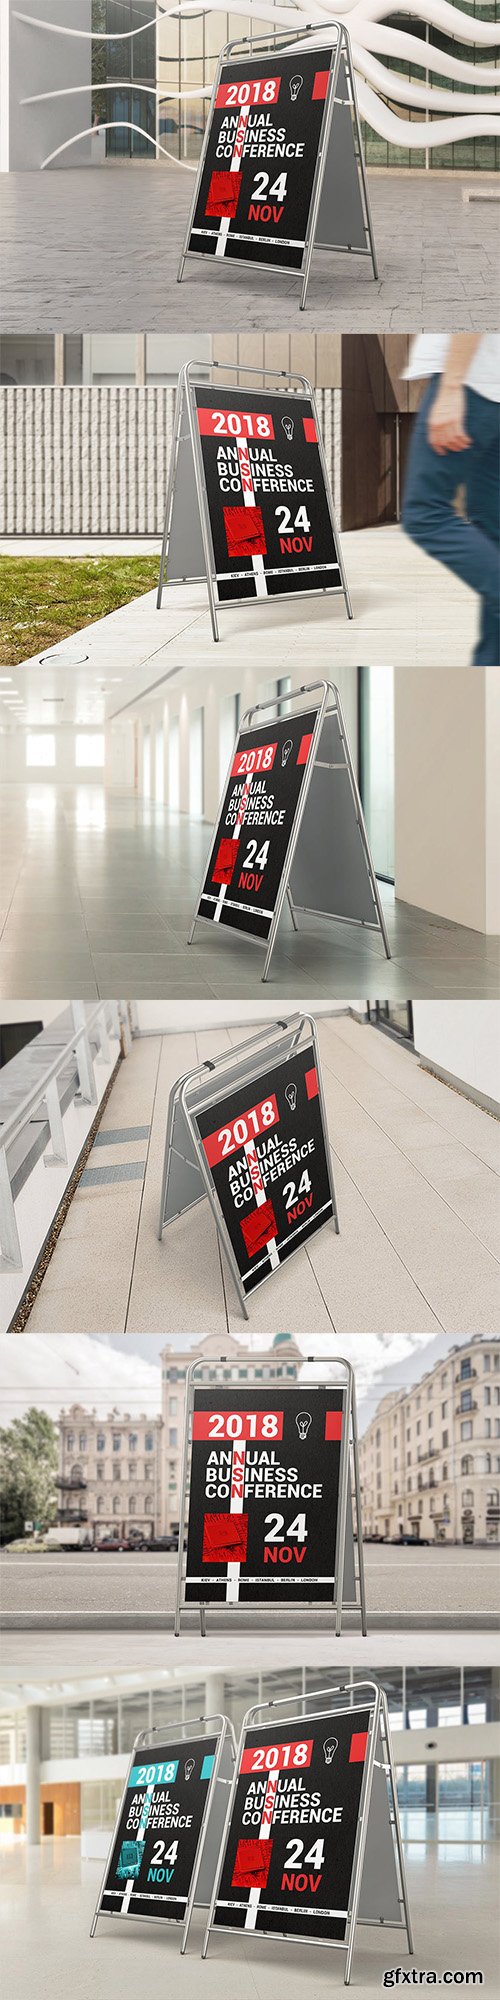 Advertising Stand Mockups 02